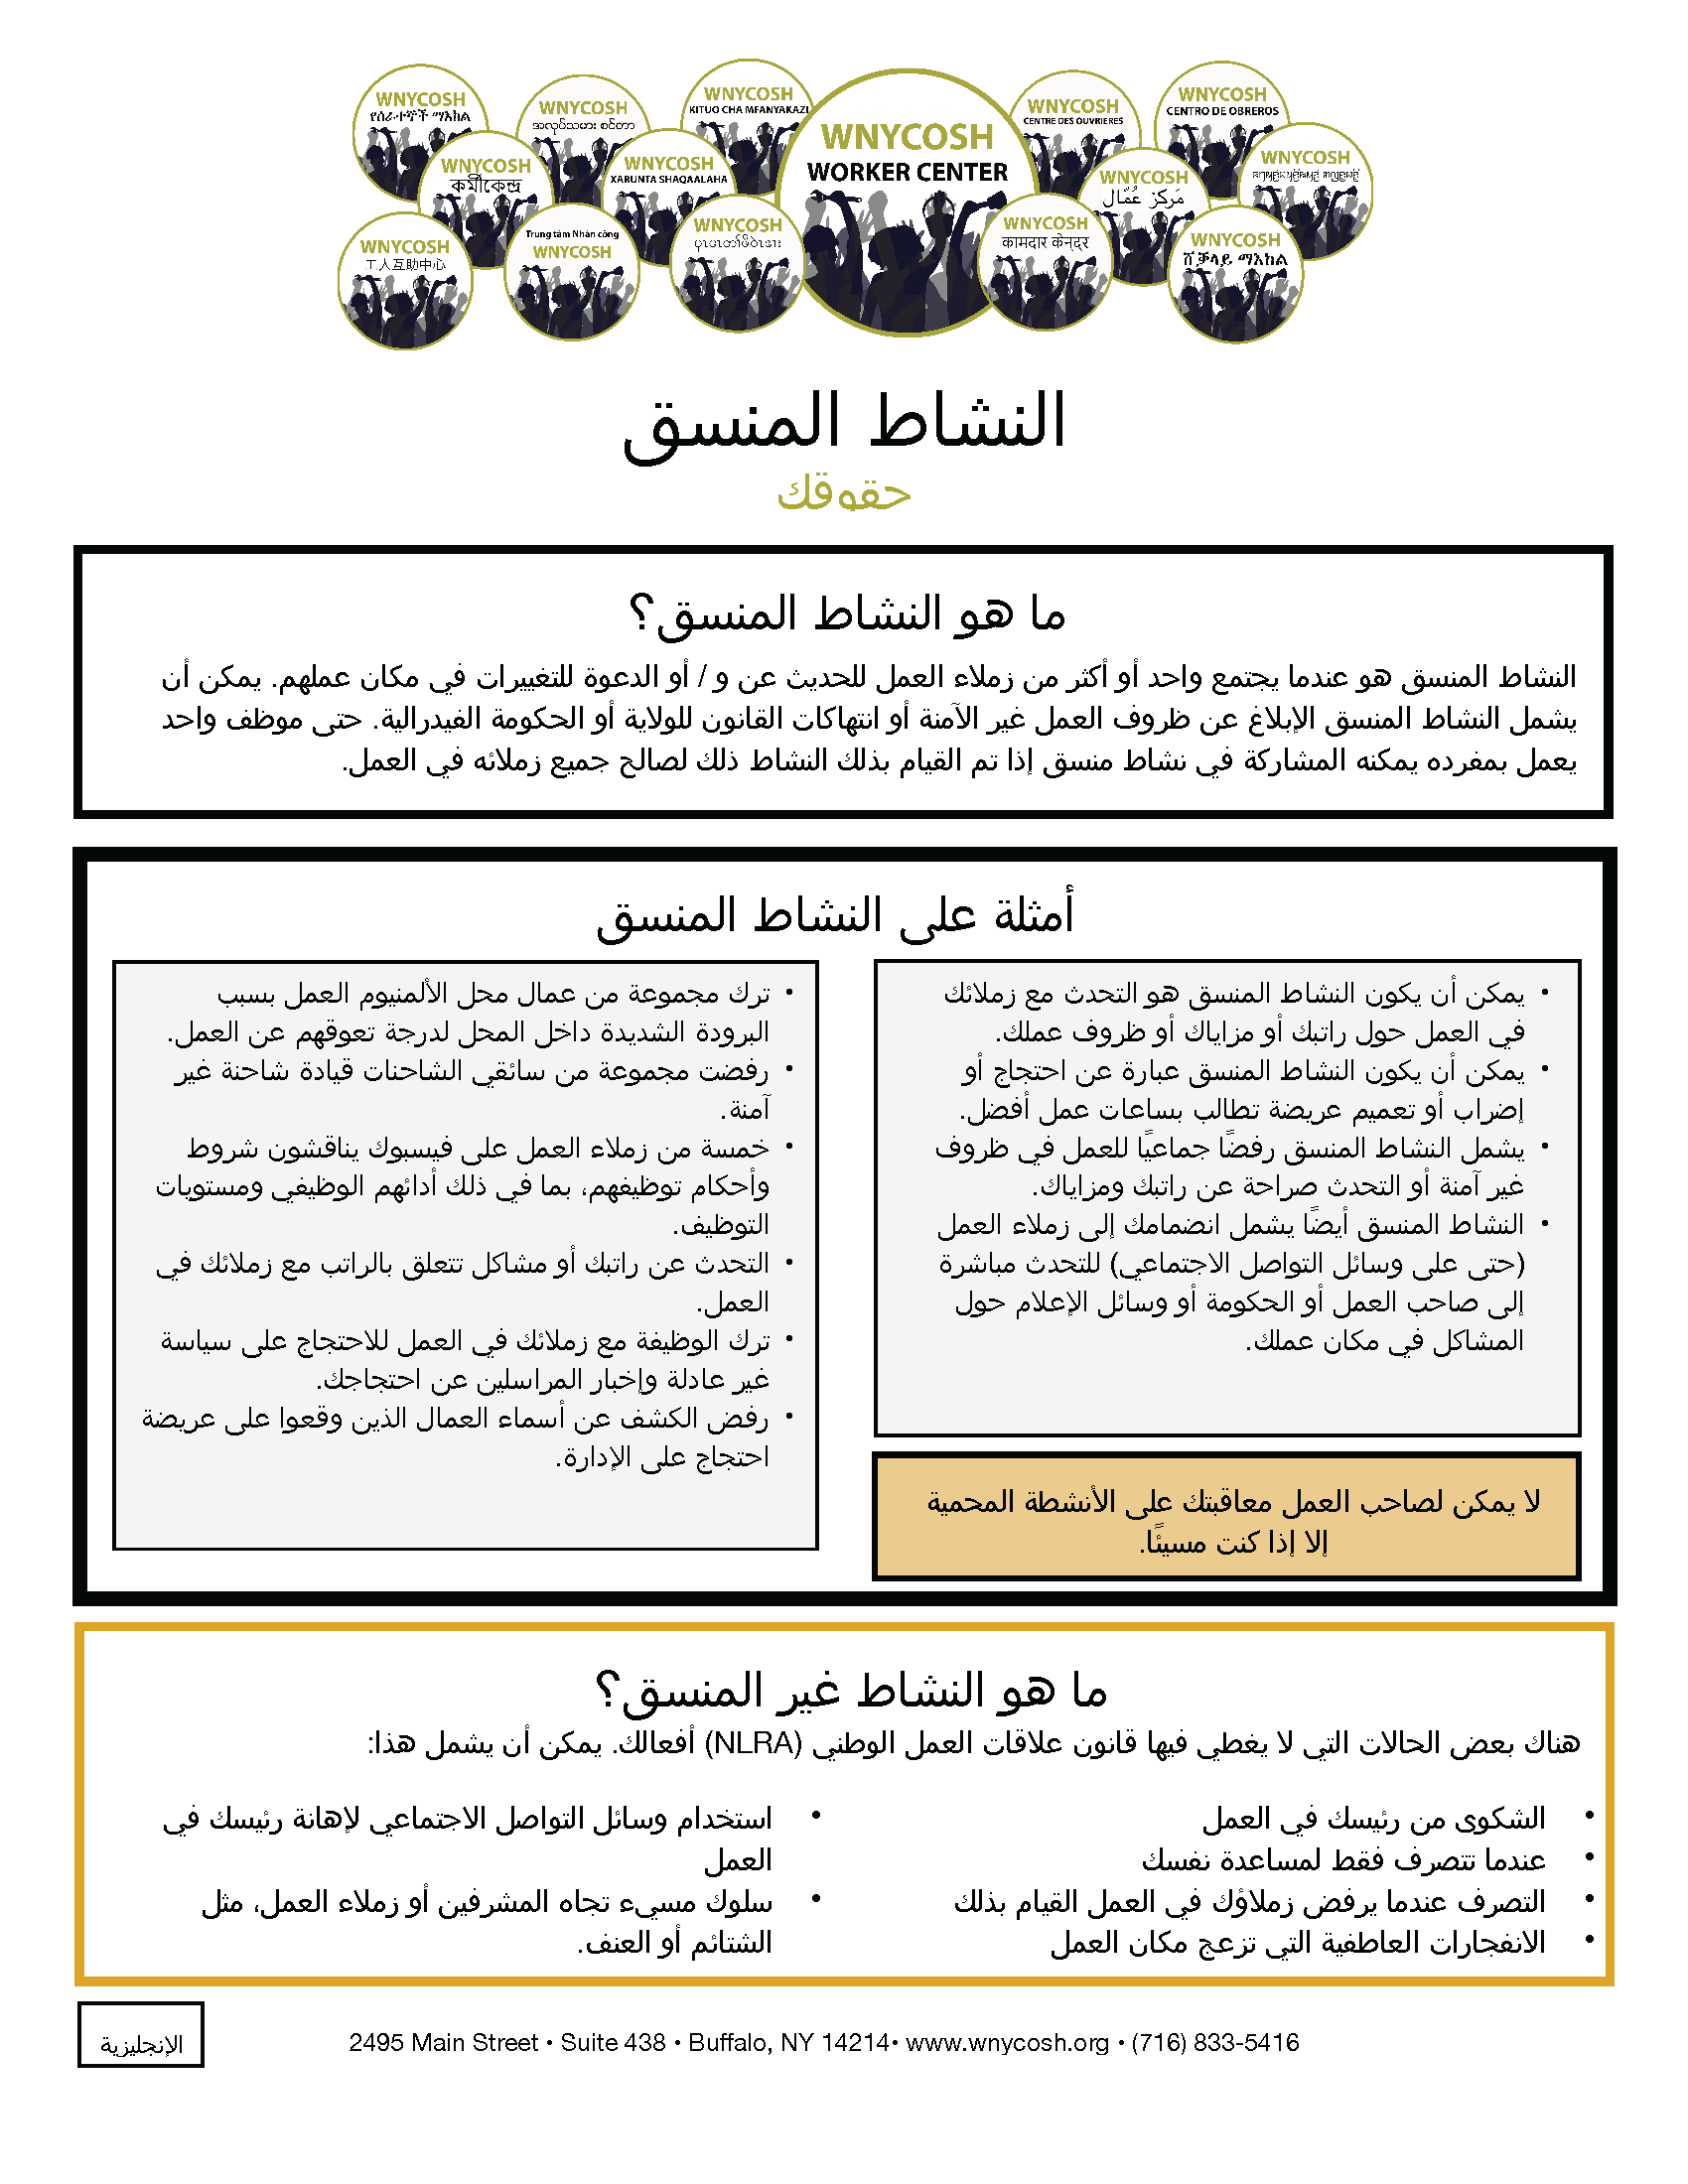 Thumbnail for Concerted Activity Factsheet in Arabic